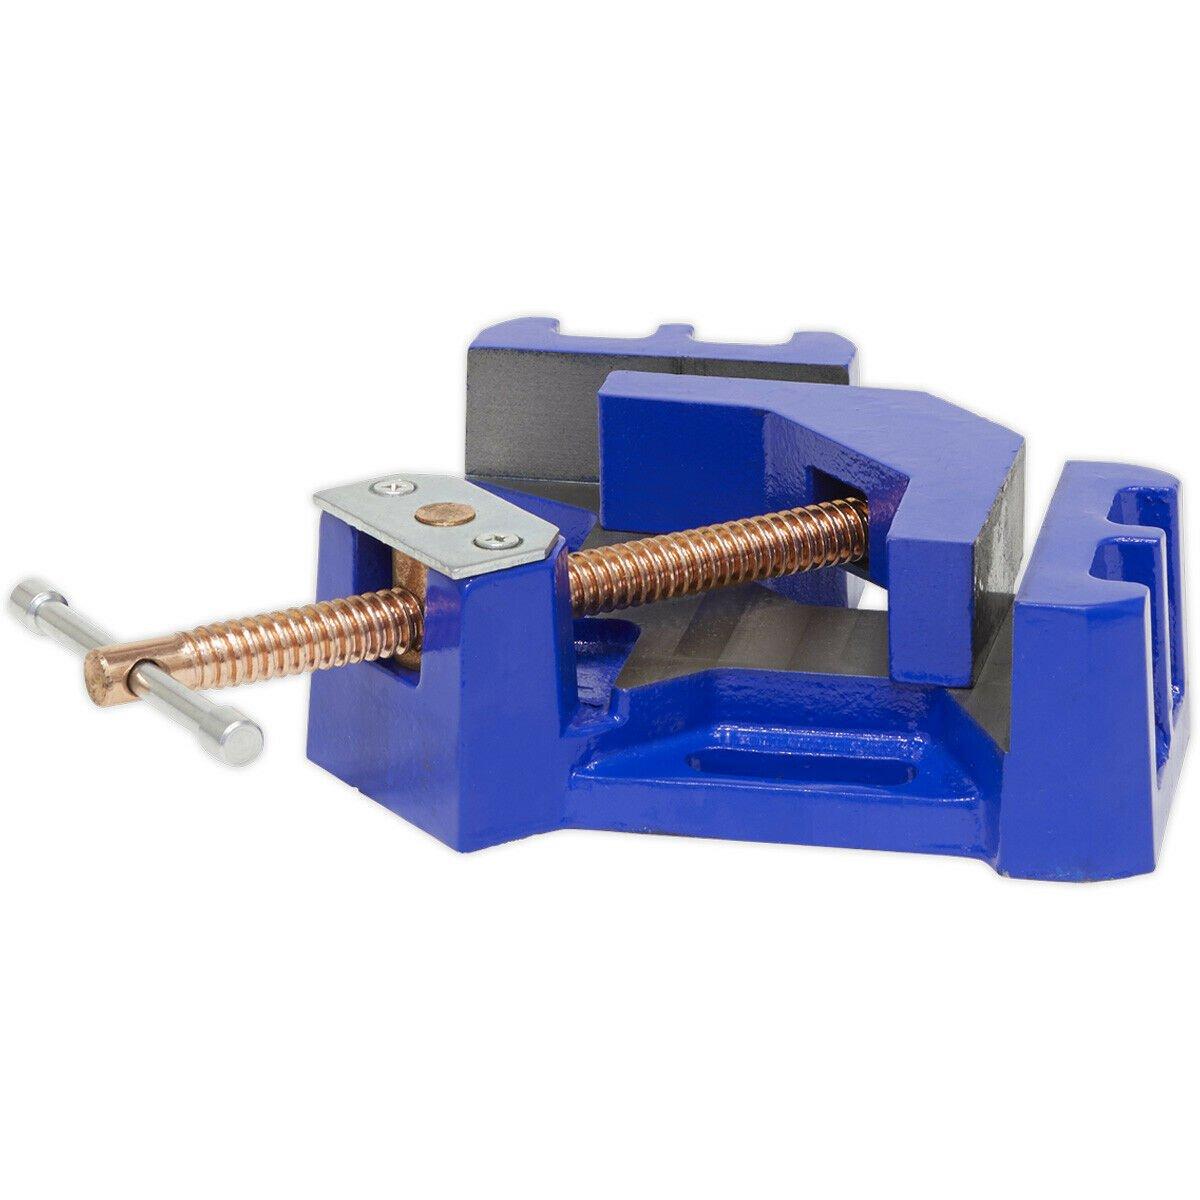 165mm Welding Vice - Self-Centring Swivel Jaw - 90 Degree Angle Welding Aid